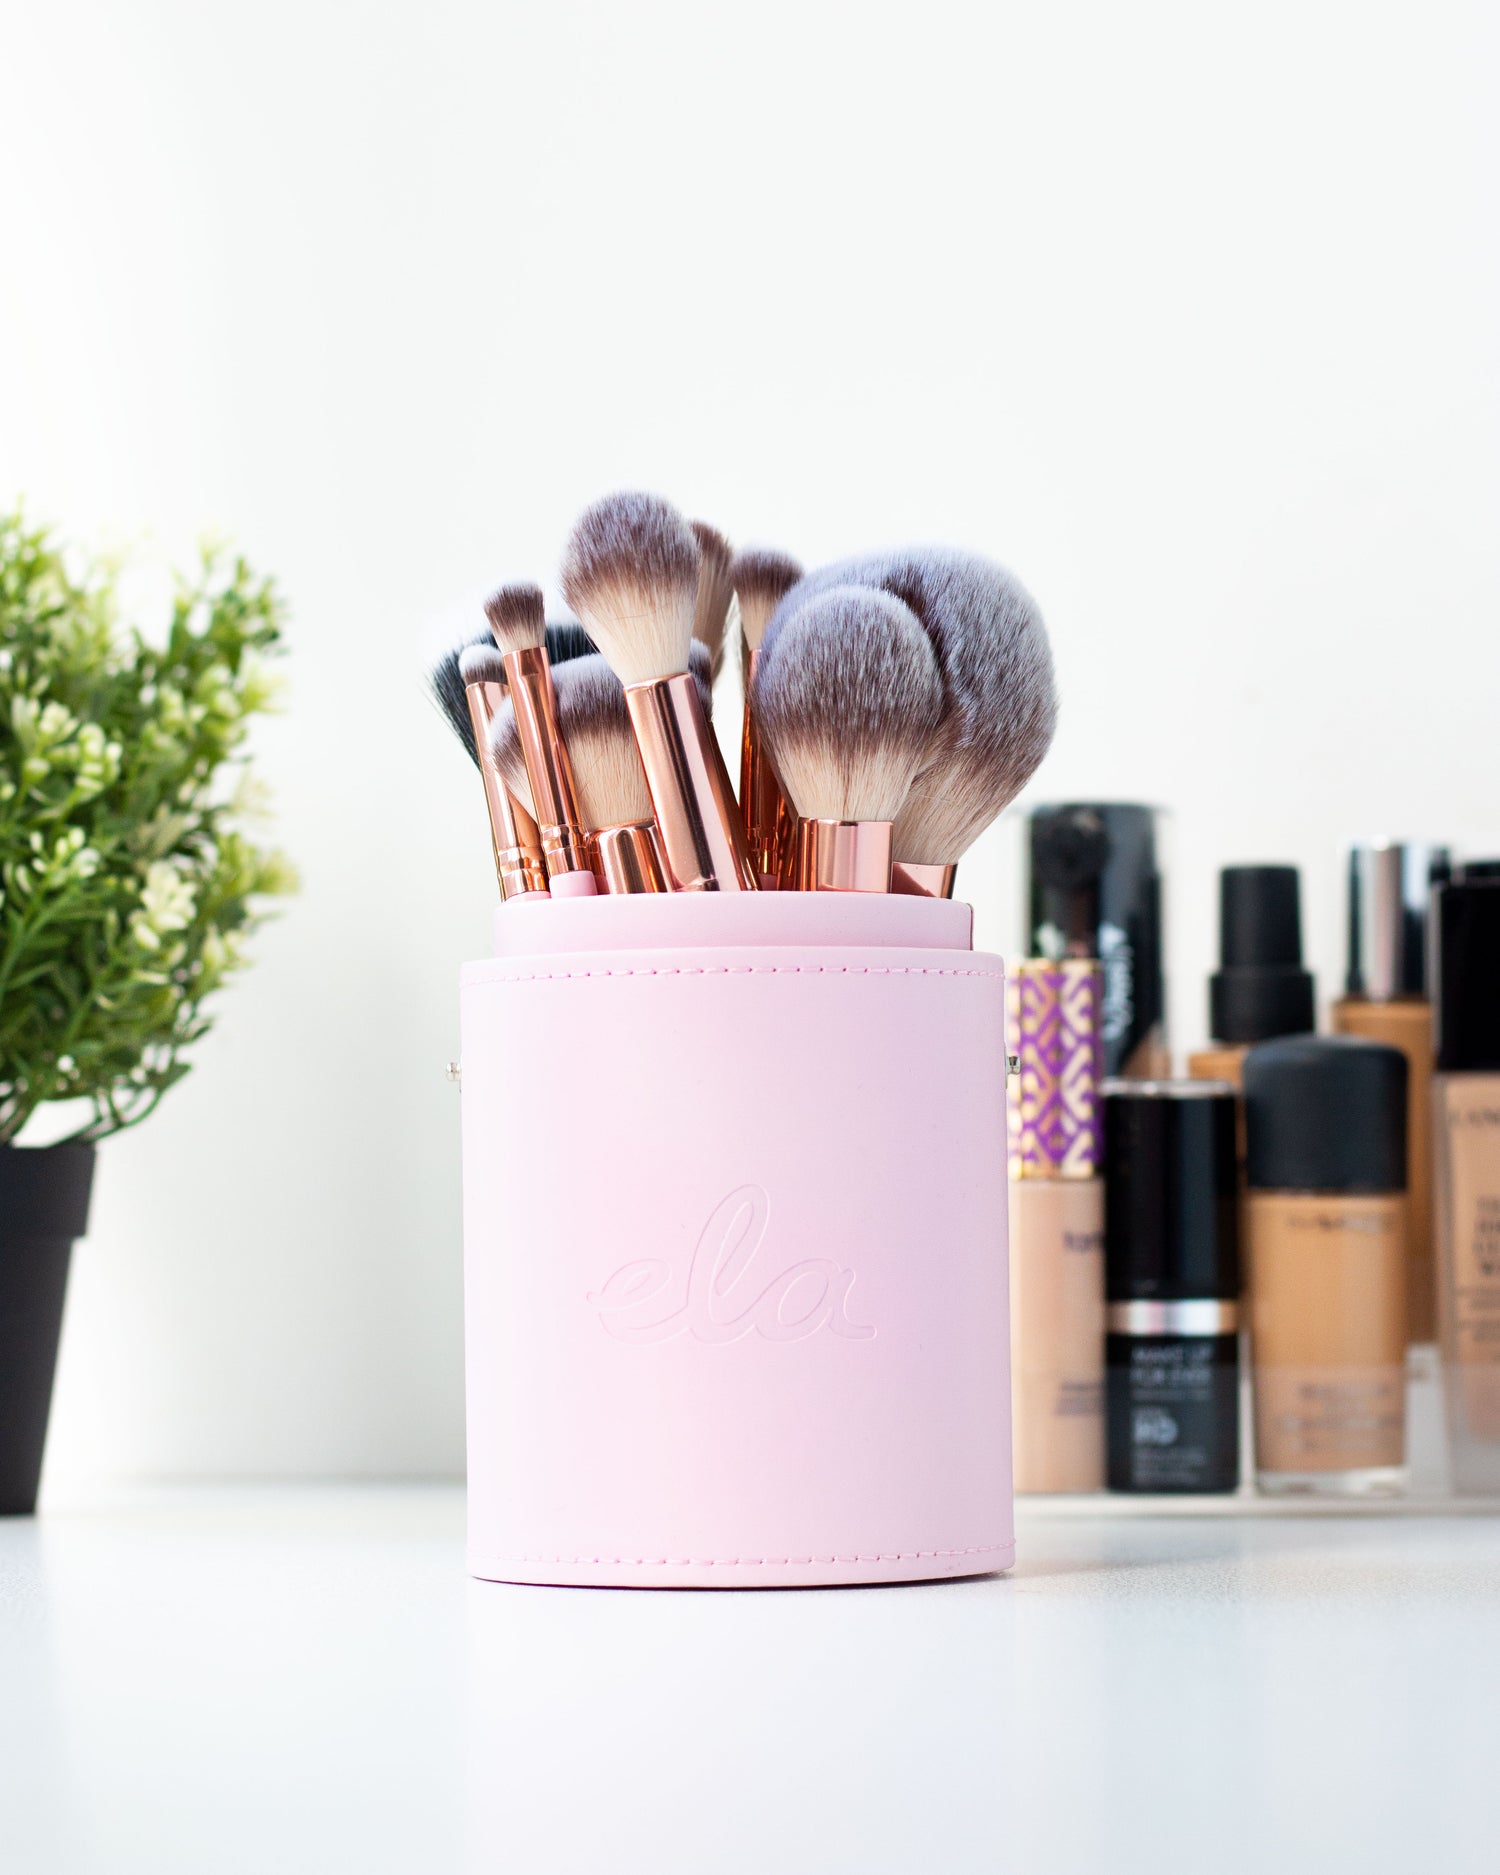 Photo of brushes from the Angel Falls Brush Set in the cup holder, sitting on a vanity